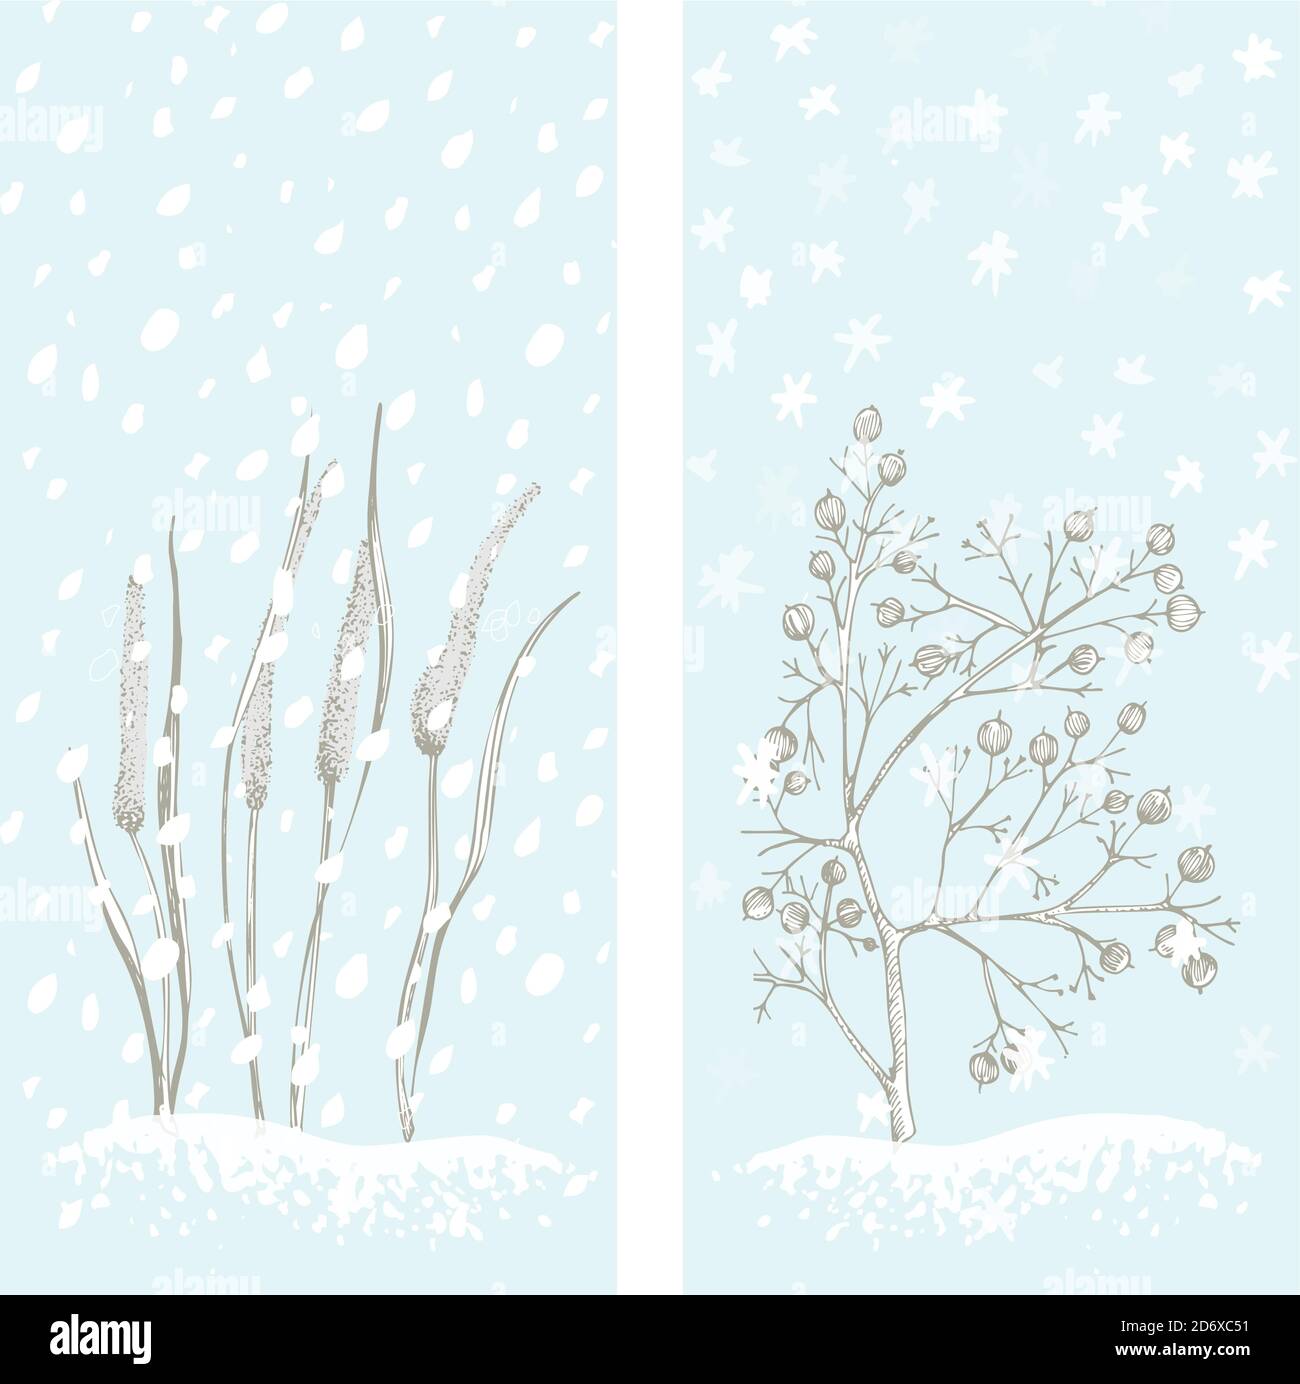 Set christmas new year card with berries and dried grass Winter plants isolated on blue snow background. Hand-drawn vintage sketch botanical art Stock Vector